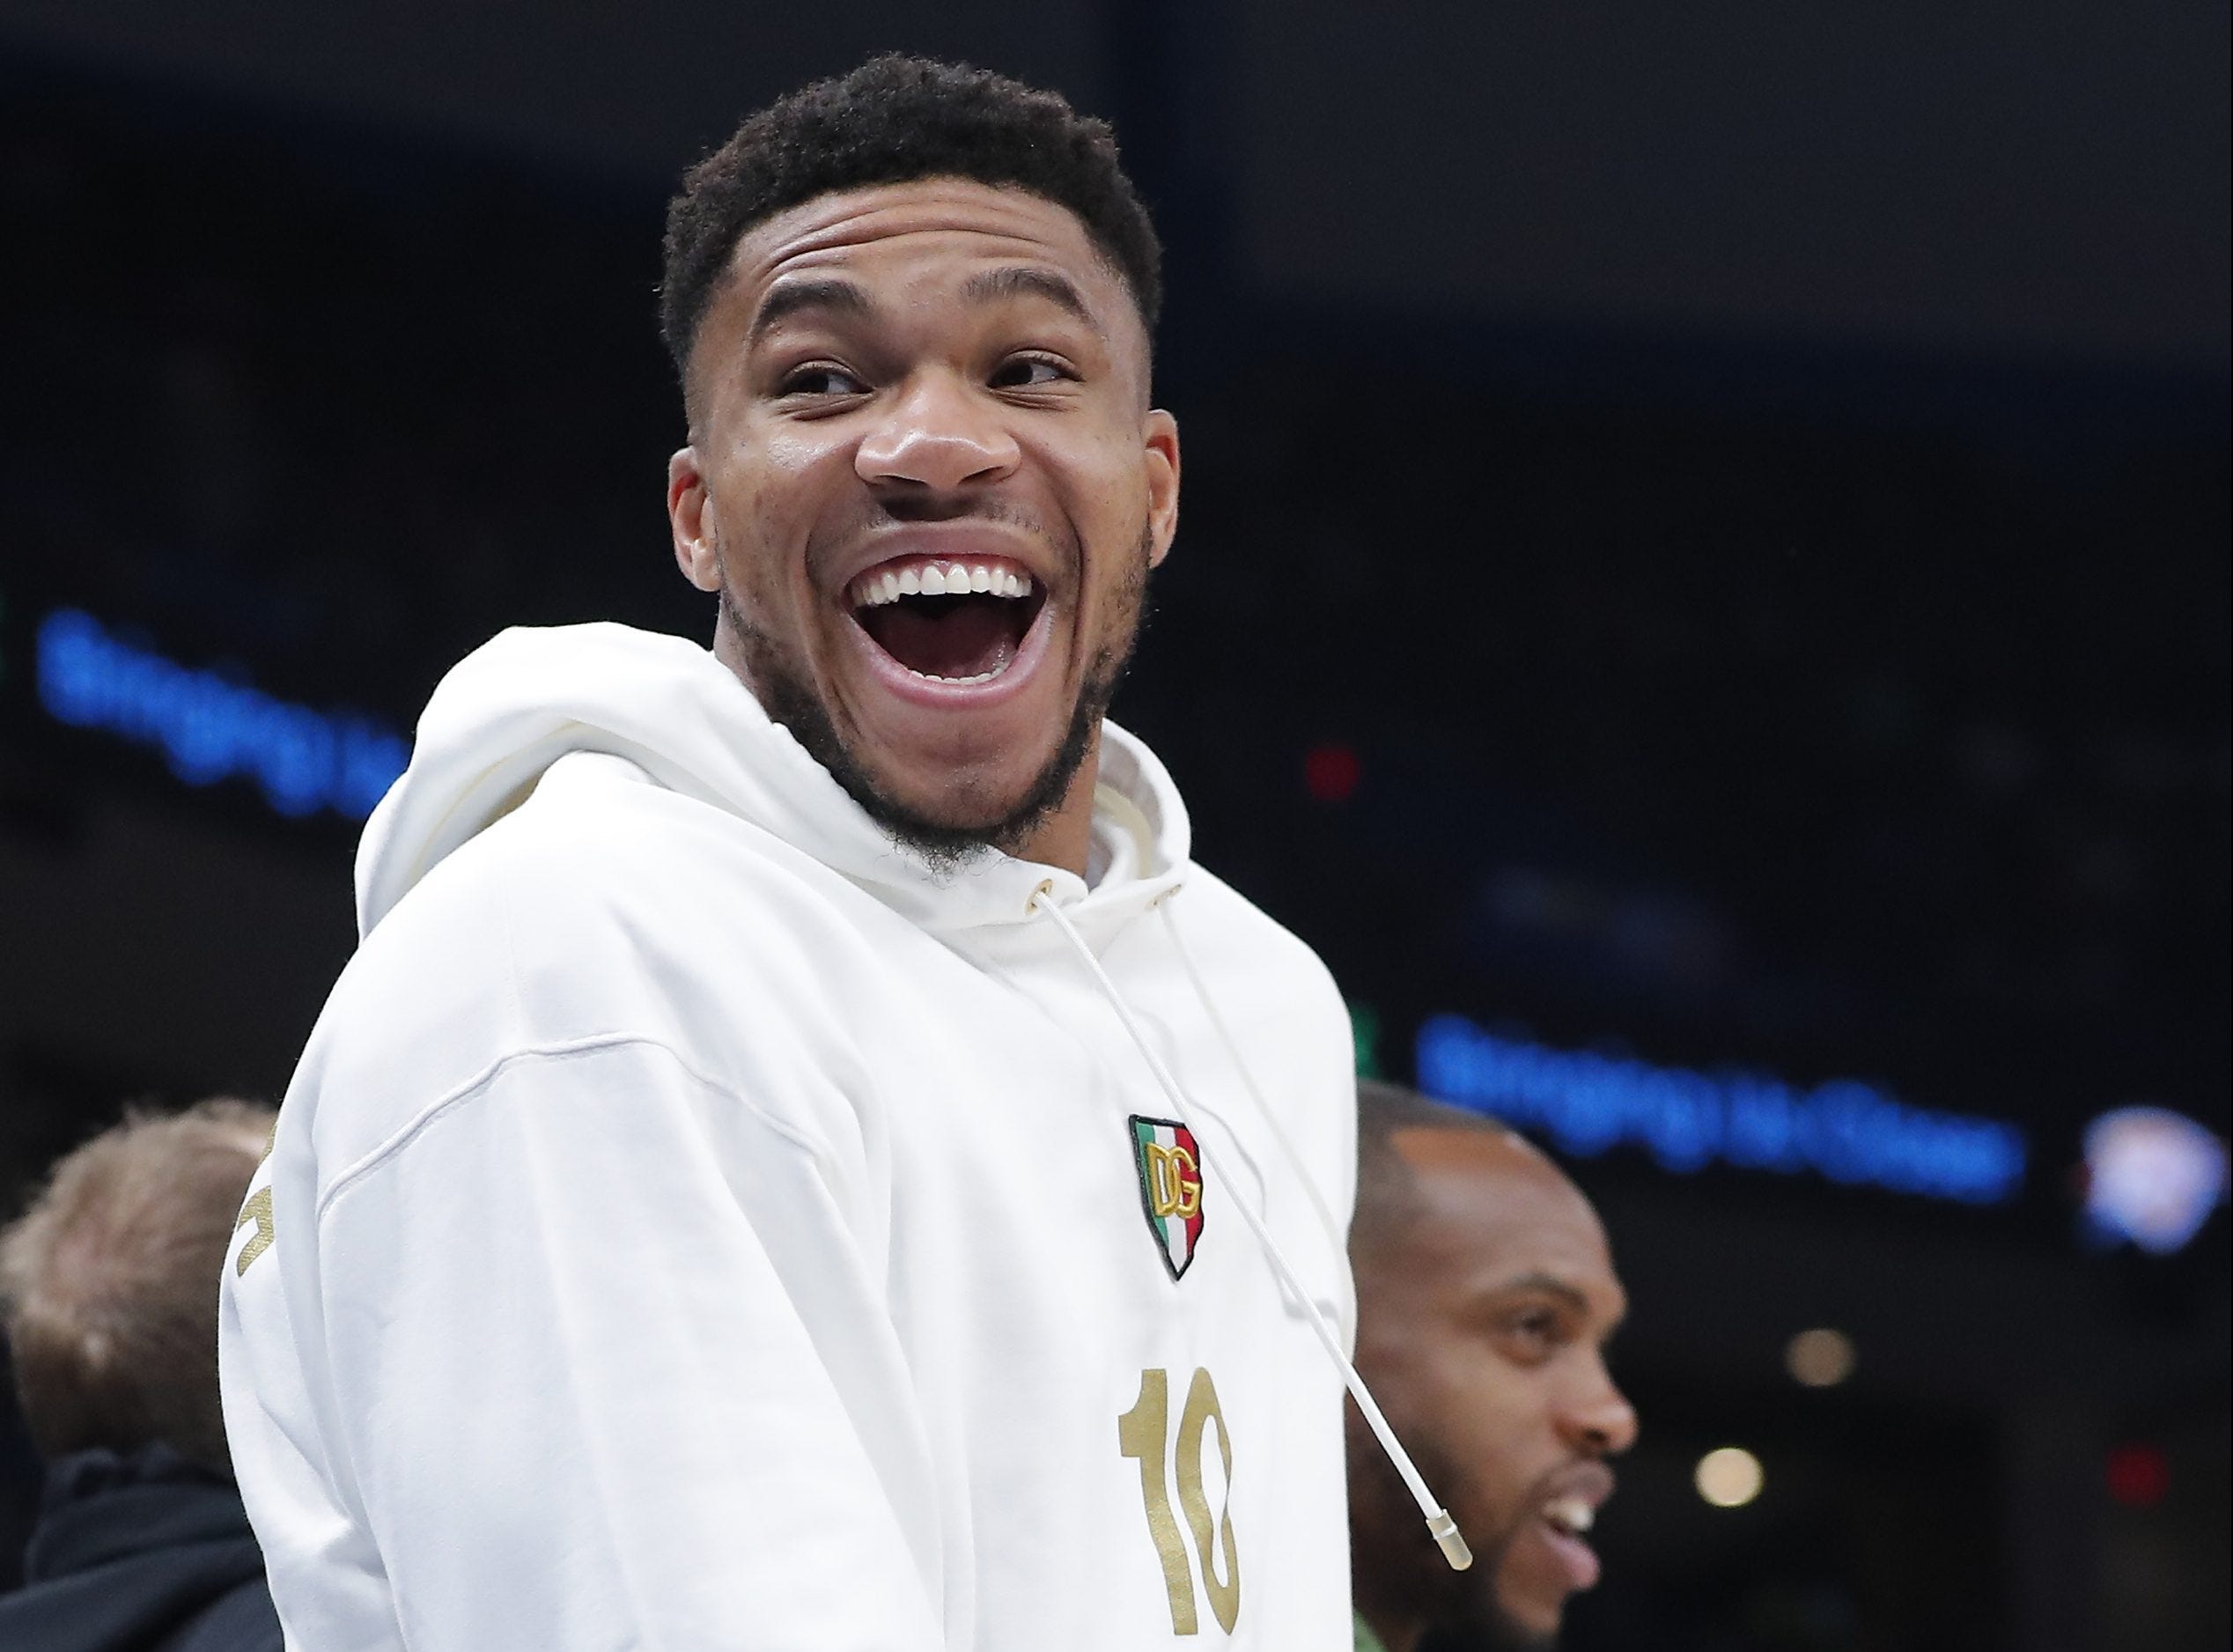 giannis antetkounmpo might never get another favorable call again after taking a savage shot at nba official marc davis